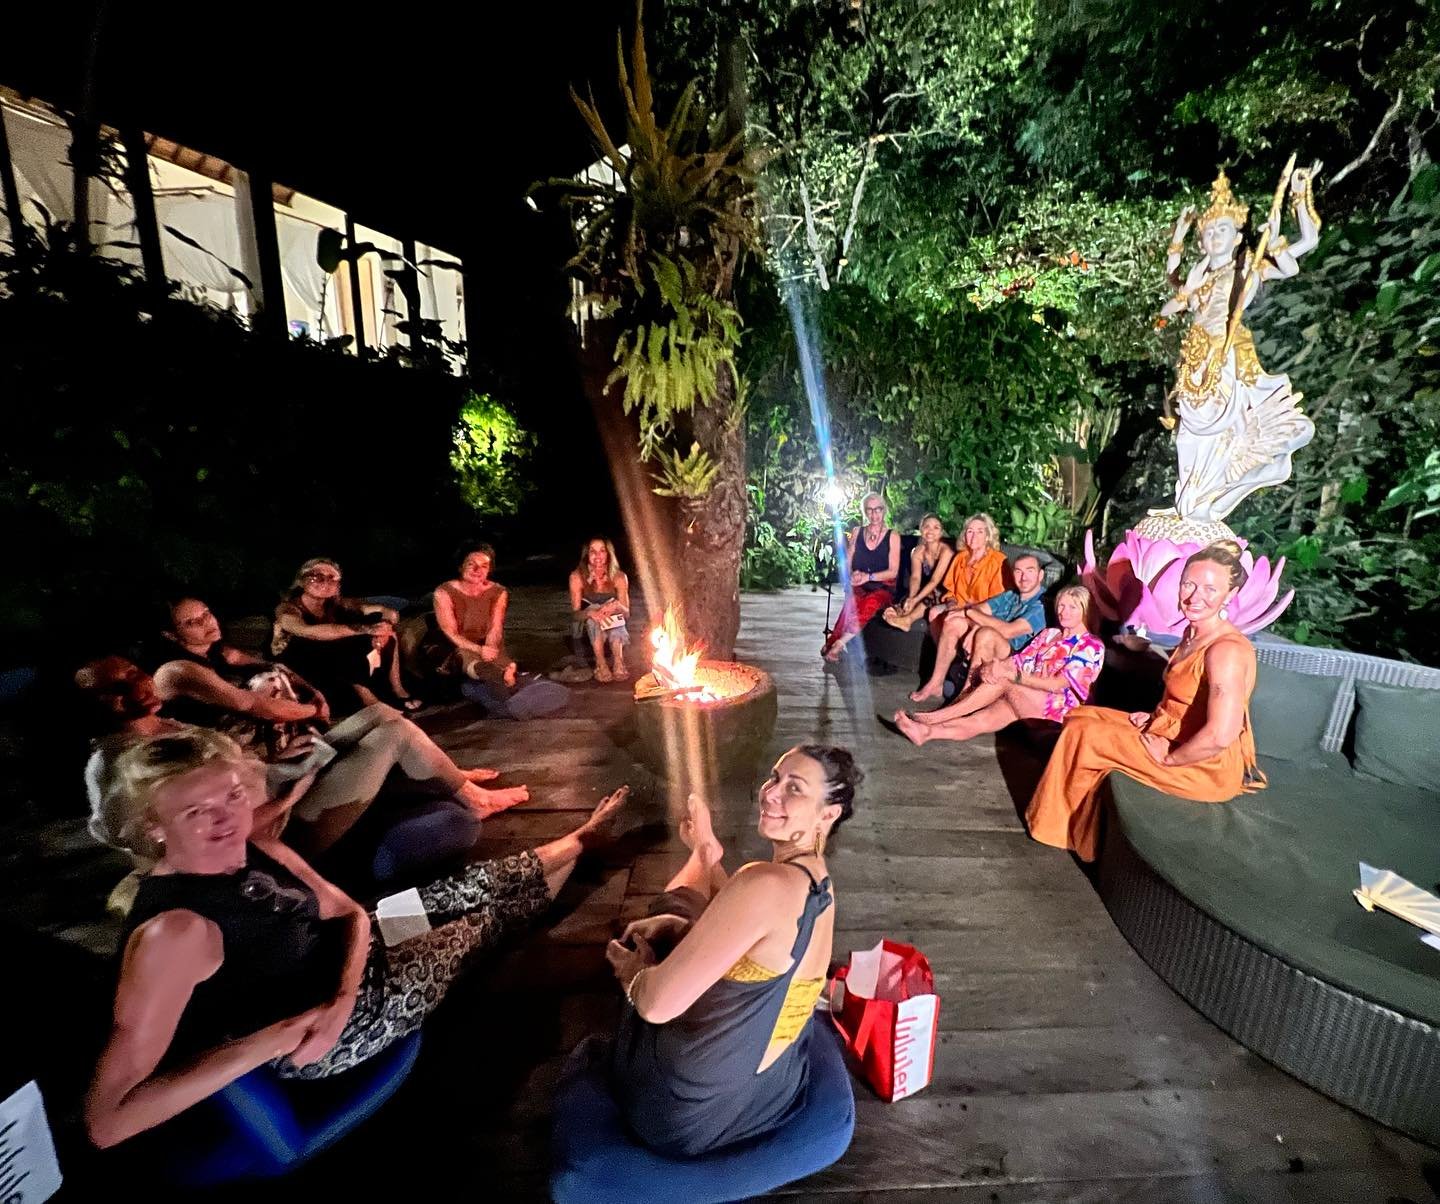 Wrapping up a beautiful week in Bali.  Cherished memories &amp; connections to be savored for weeks and years to come!  As we all get back to our lives; a deep inner knowing stays in our hearts.  True gratitude for all who shared in this adventure!  